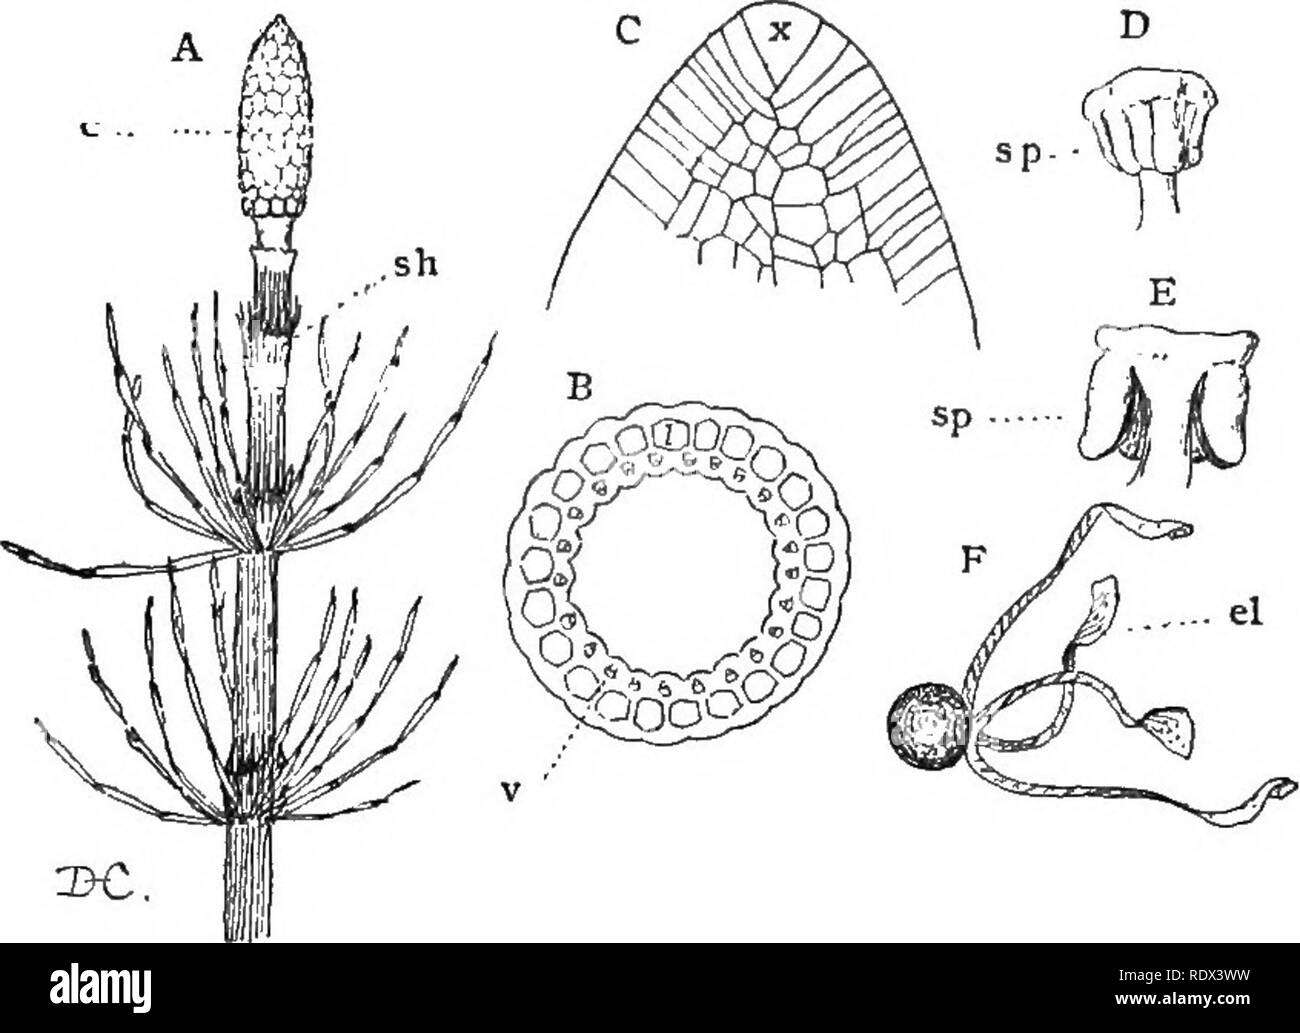 . Lectures on the evolution of plants. Botany; Plants. 140 EVOLUTION OF PLANTS except for the conspicuous lobes referred to above. The reproductive organs are very much lilce tliose of the eusporangiate ferns, and the spermatozoids, which are large and multiciliate, closely resemble those of Osmunda.. Fig. 36 (Equisetineae). — A, upper part of a sporiferous shoot of a horse- tail (Equisetum pratense), showing the division into nodes and inter- nodes, the rudimentary sheath-leaves, sh, and the strobilus or cone of sporophylls, c; B, a cross-section of an internode of E. maximum, shovriug the ar Stock Photo